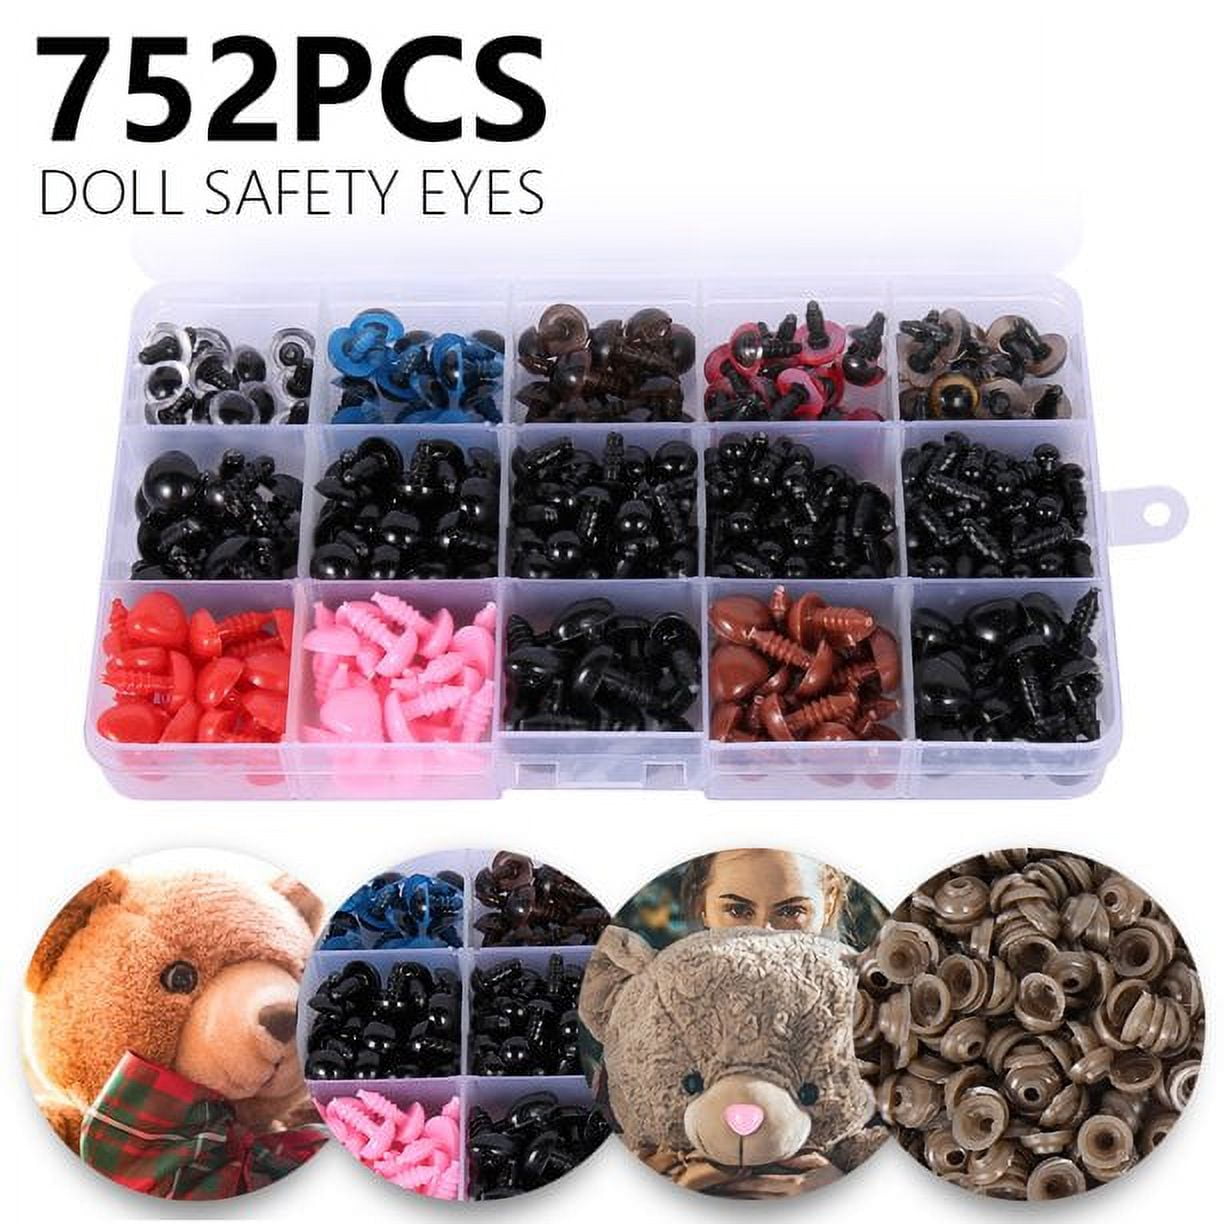 752 Safety Eyes and Noses with Washers, Colorful Plastic Safety